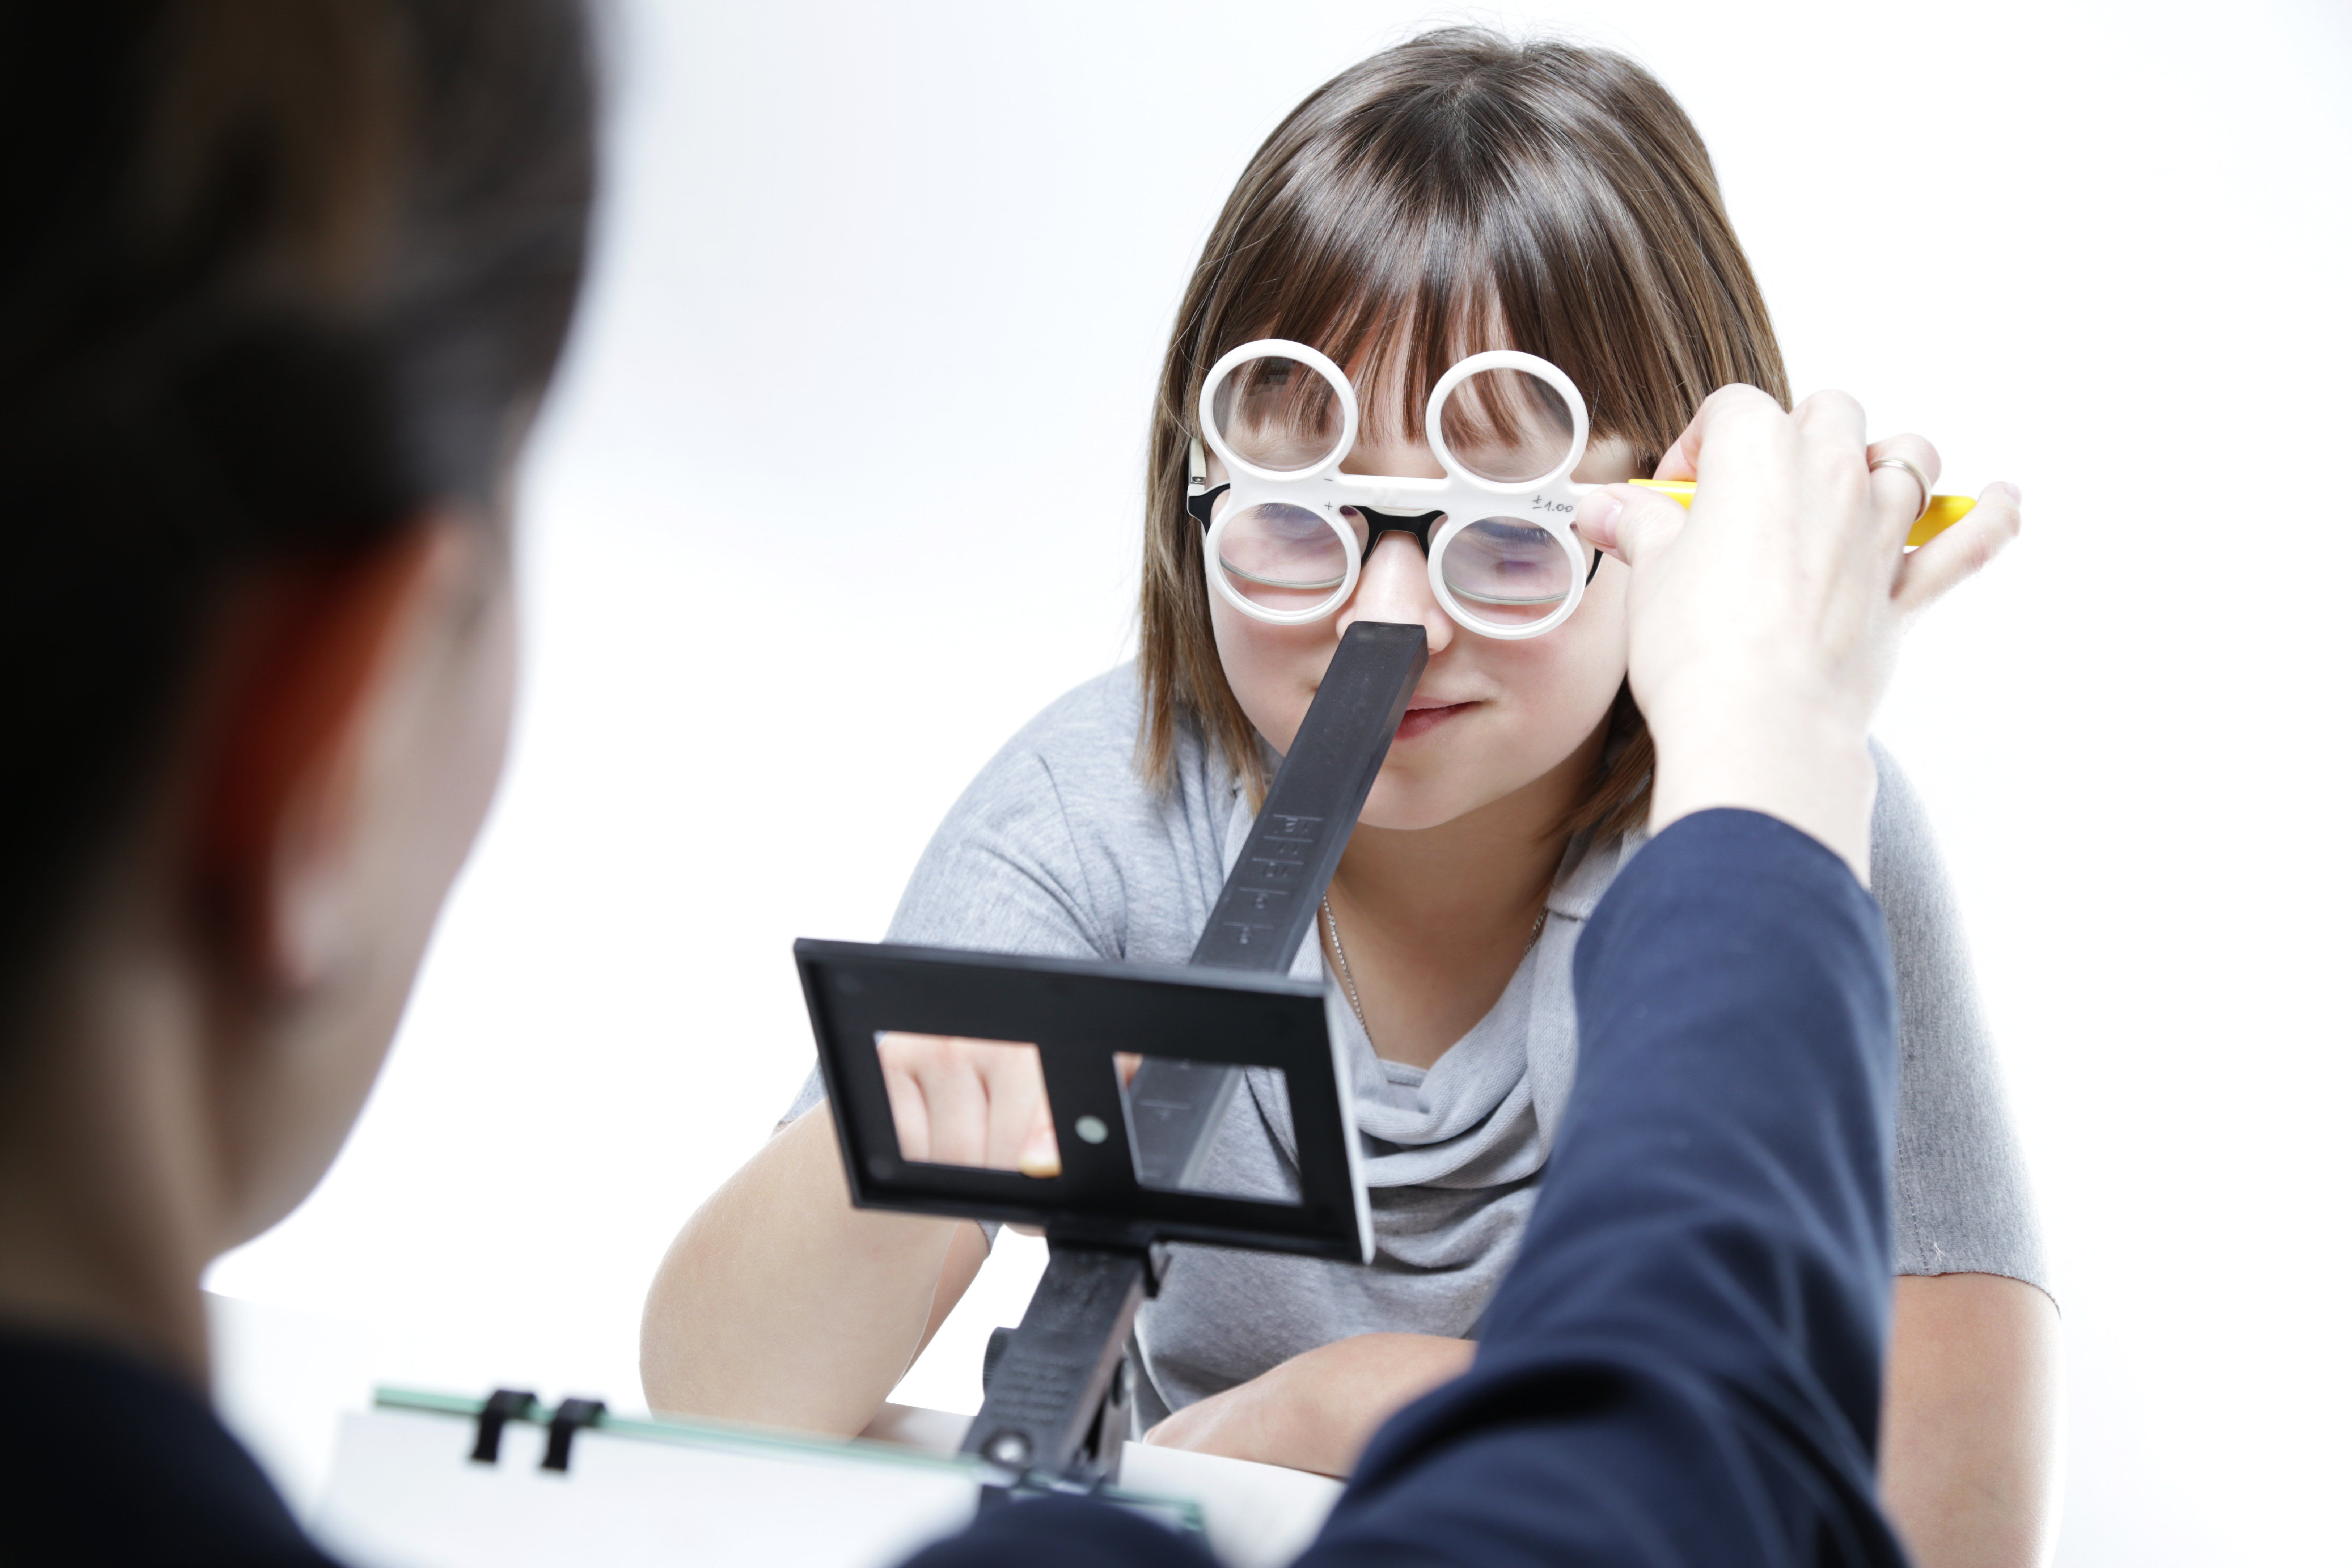 What Is Vision Therapy, and What Conditions Can It Treat?